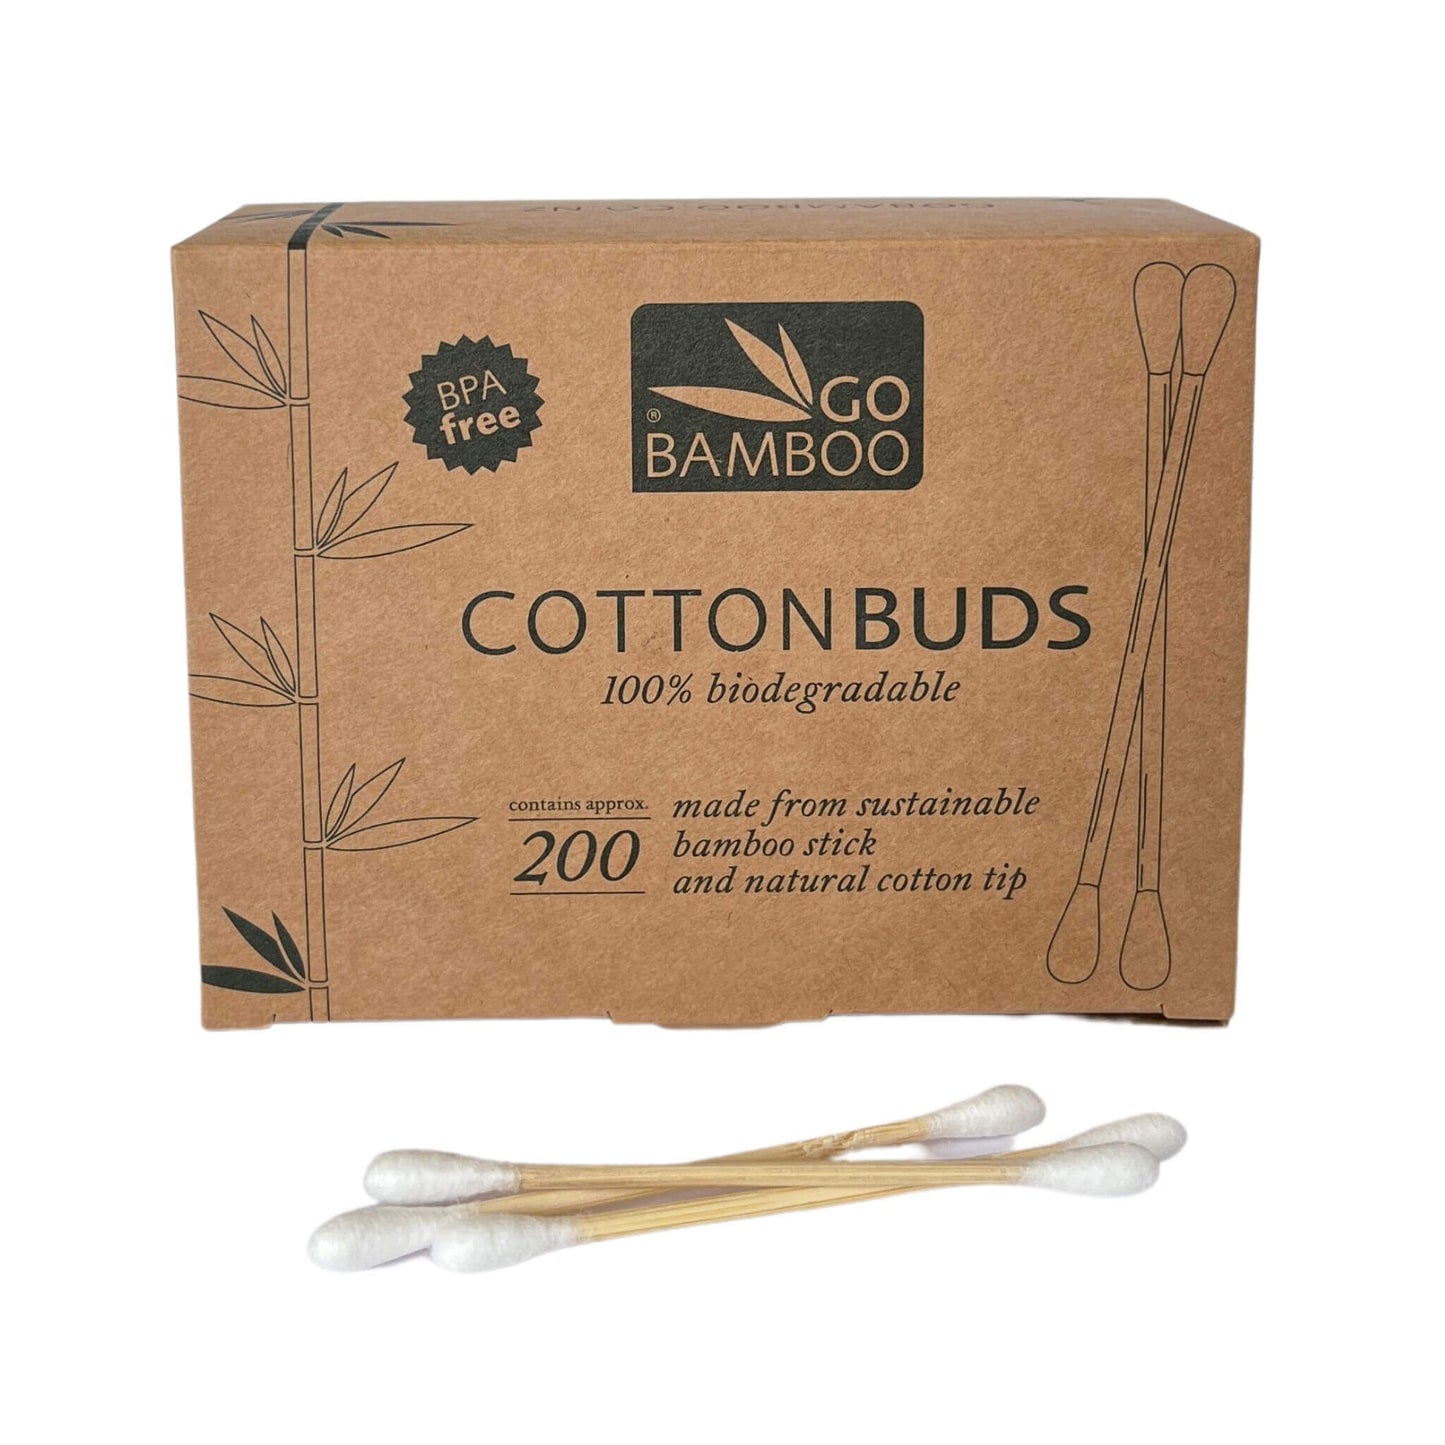 go bamboo cotton buds and box